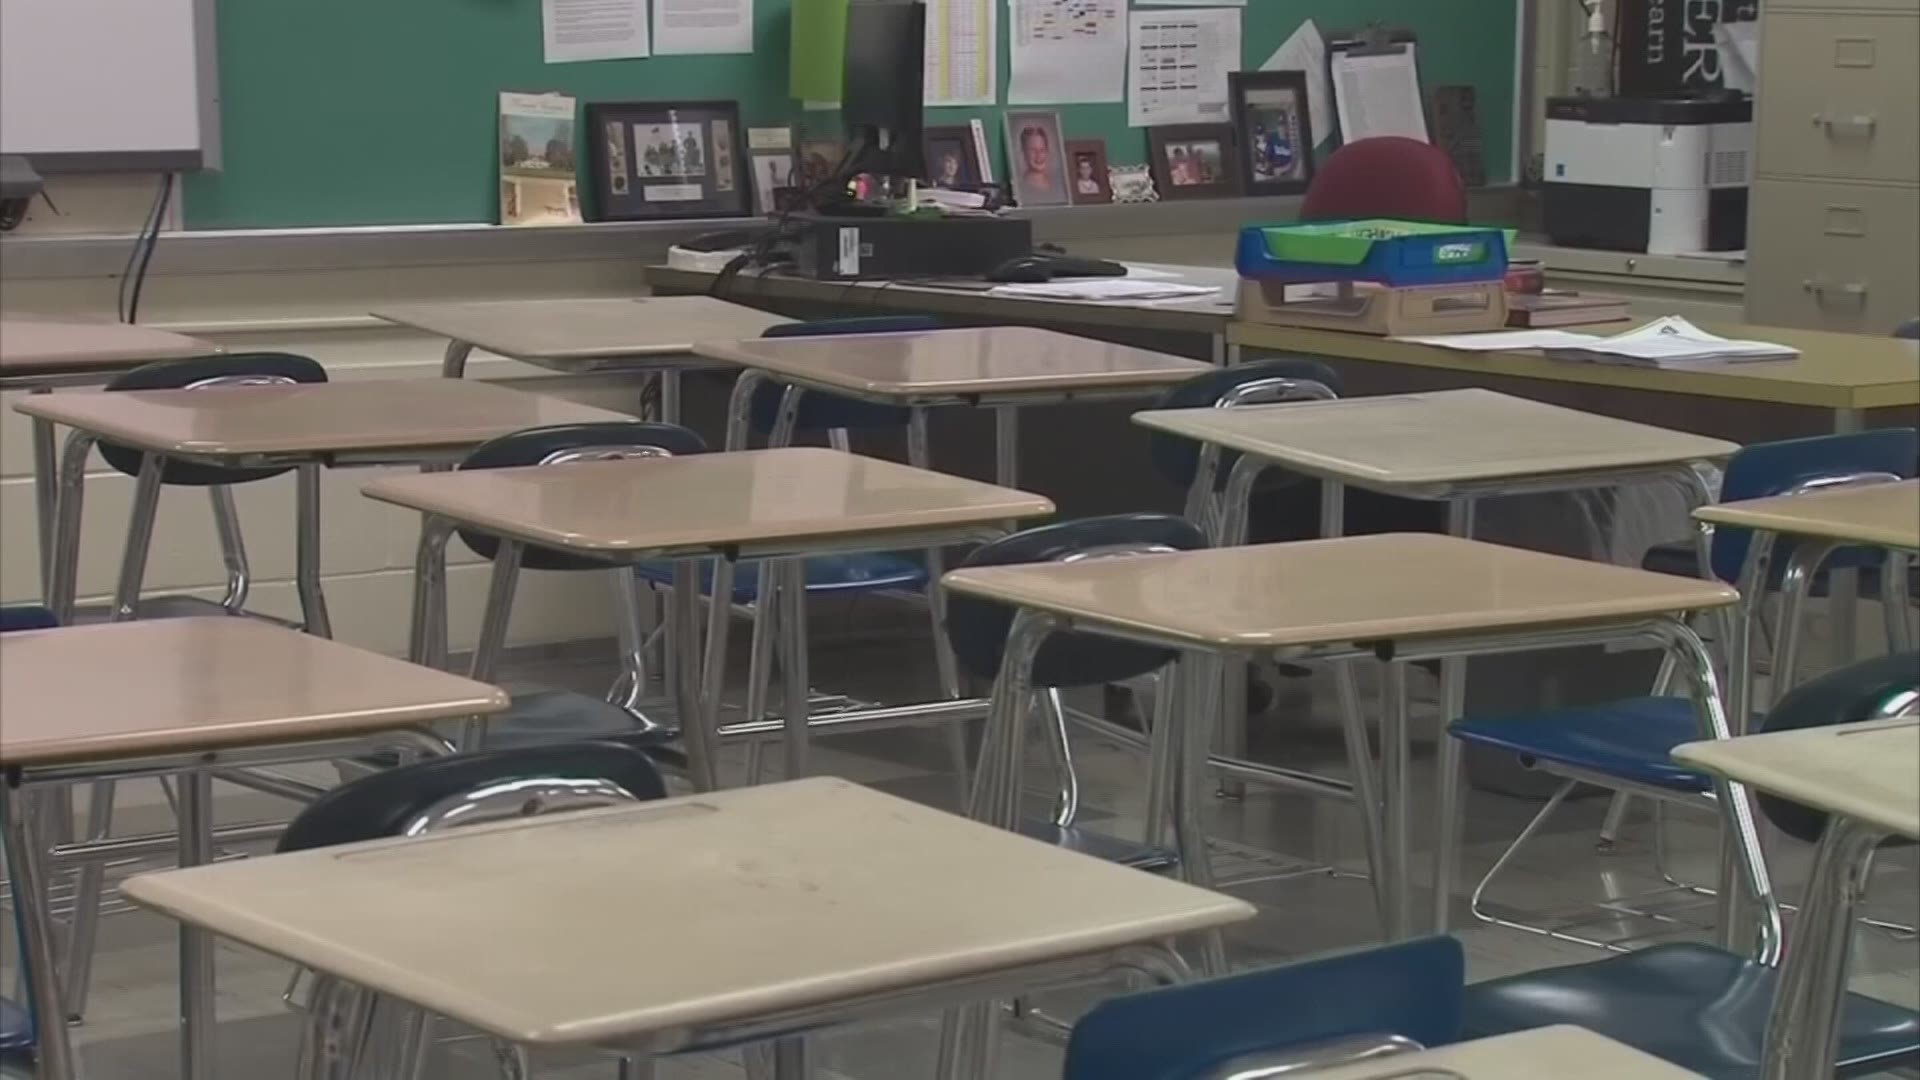 Most public school students statewide are back in the classroom in some capacity.